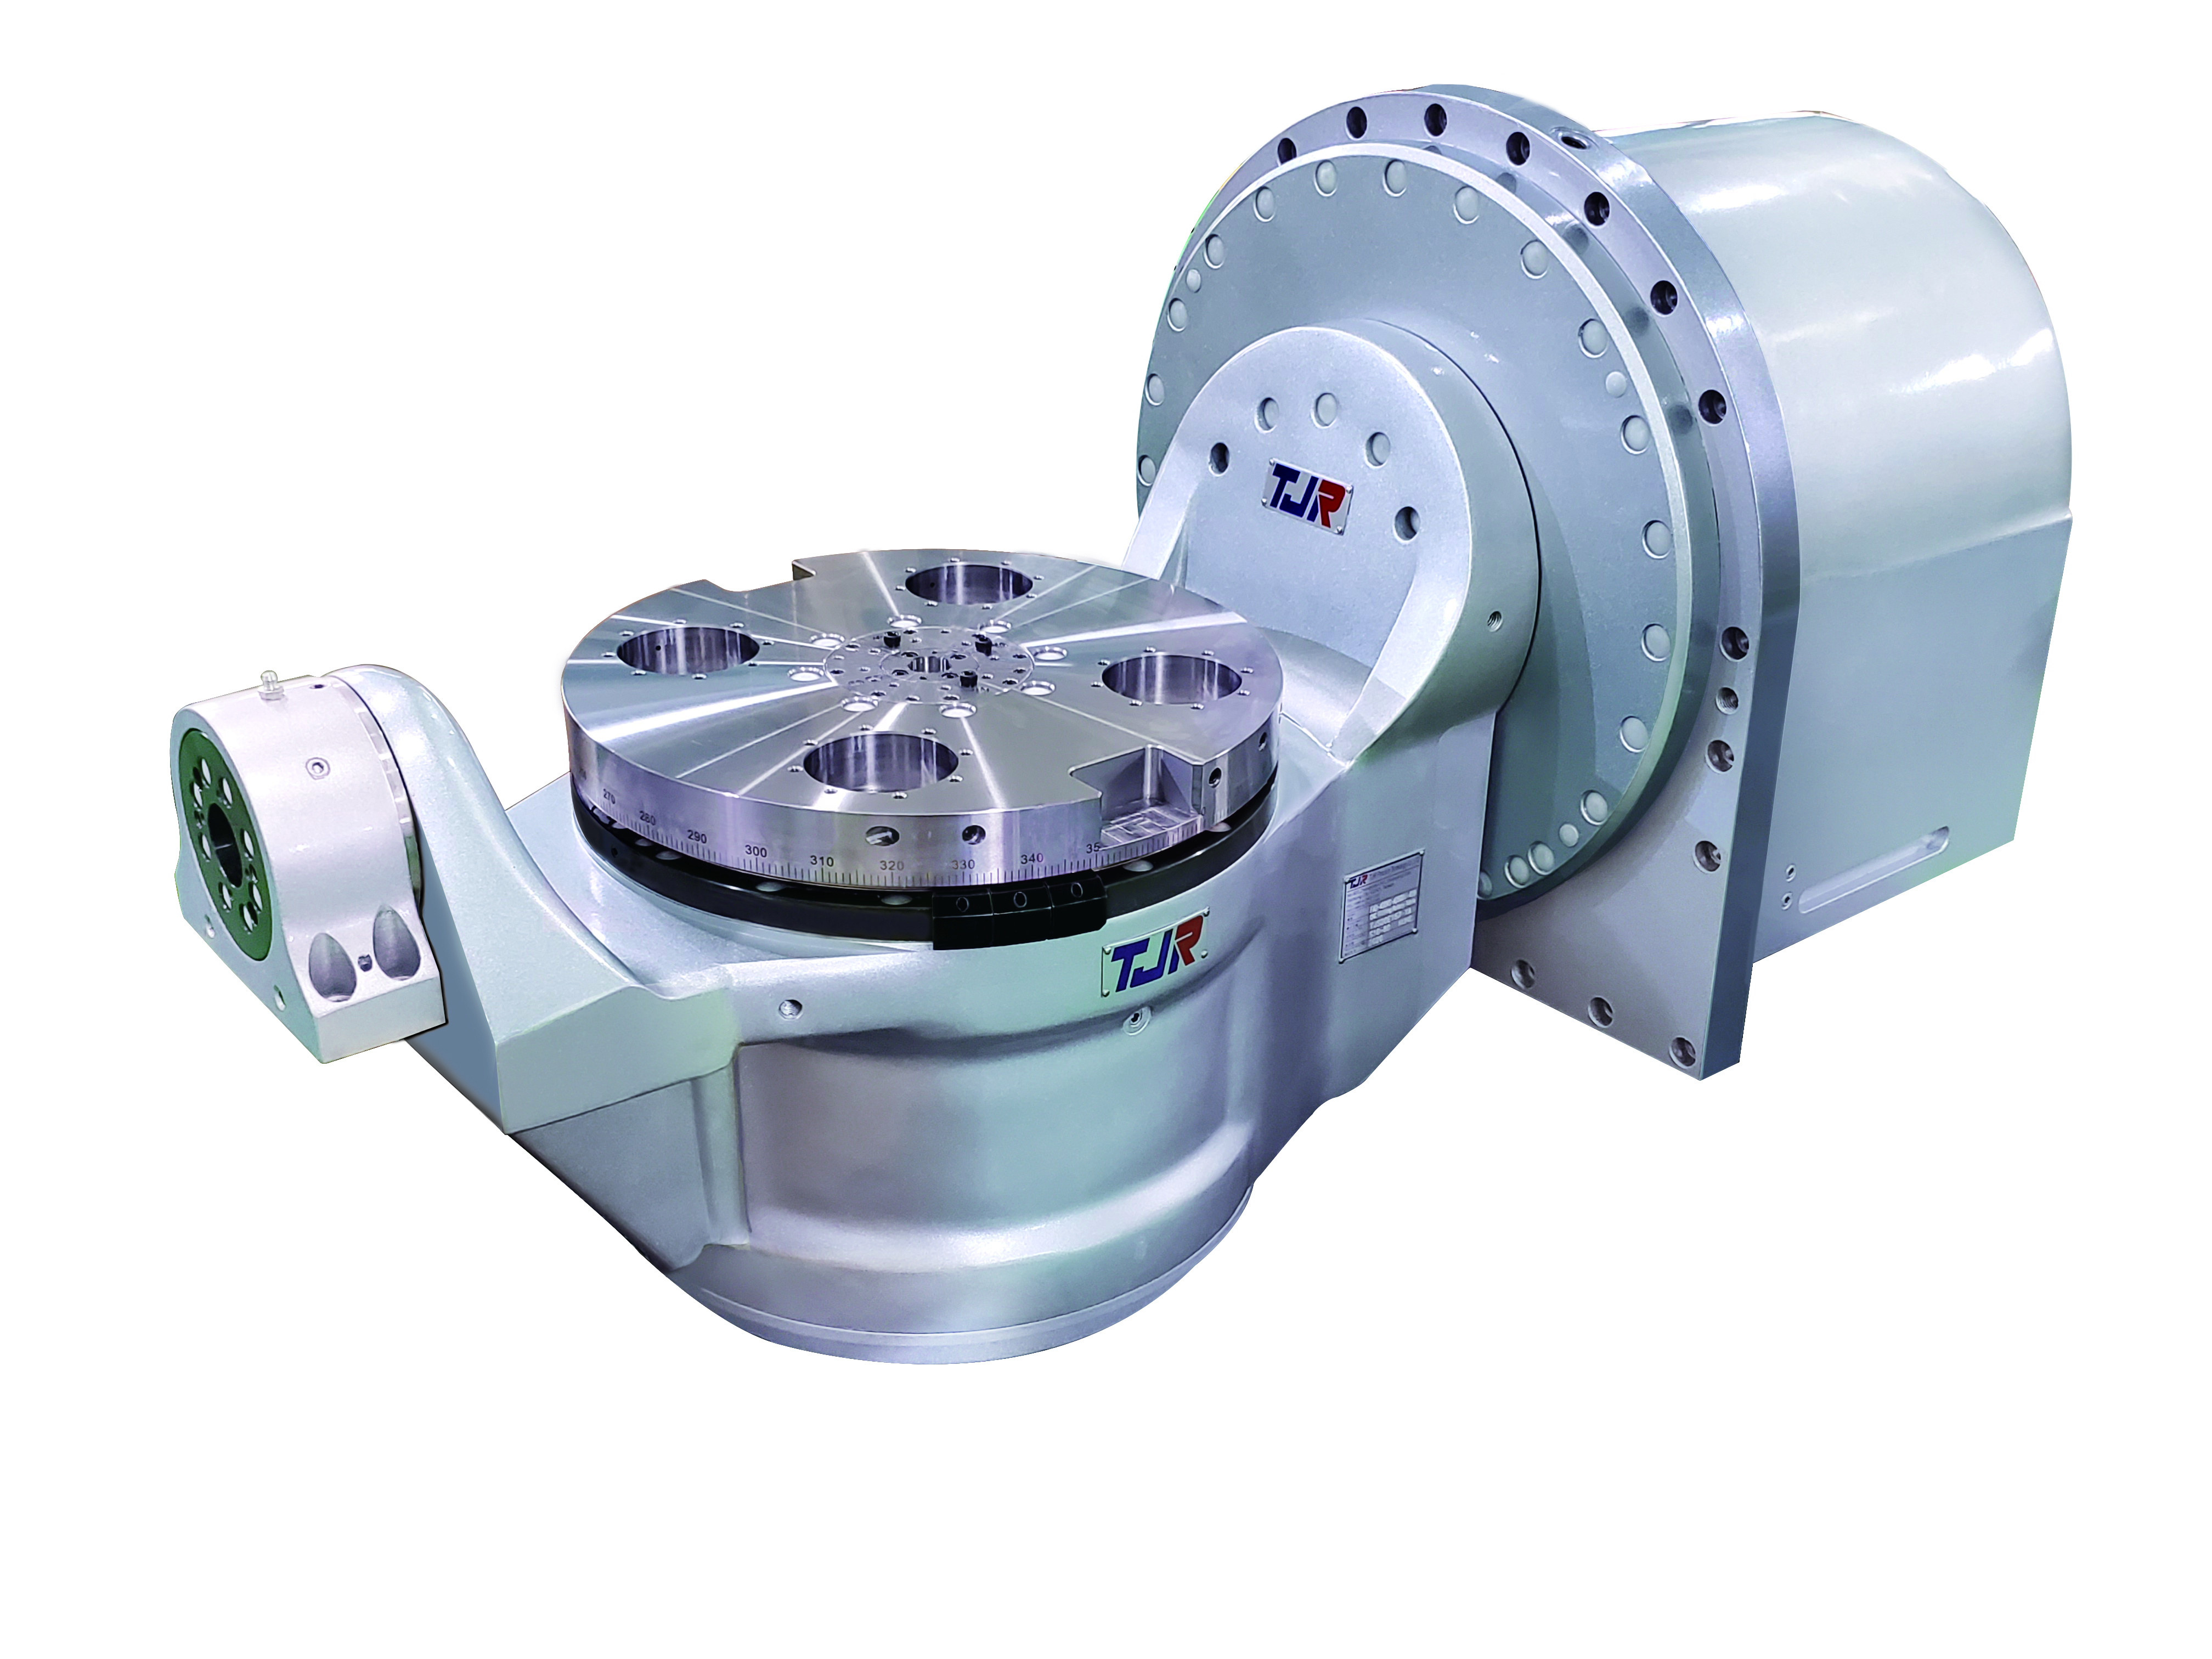 The 4th & 5th Axis Direct Drive Motor Series - The 4th Axis Direct Drive Motor Series (Pneumatic Brake)